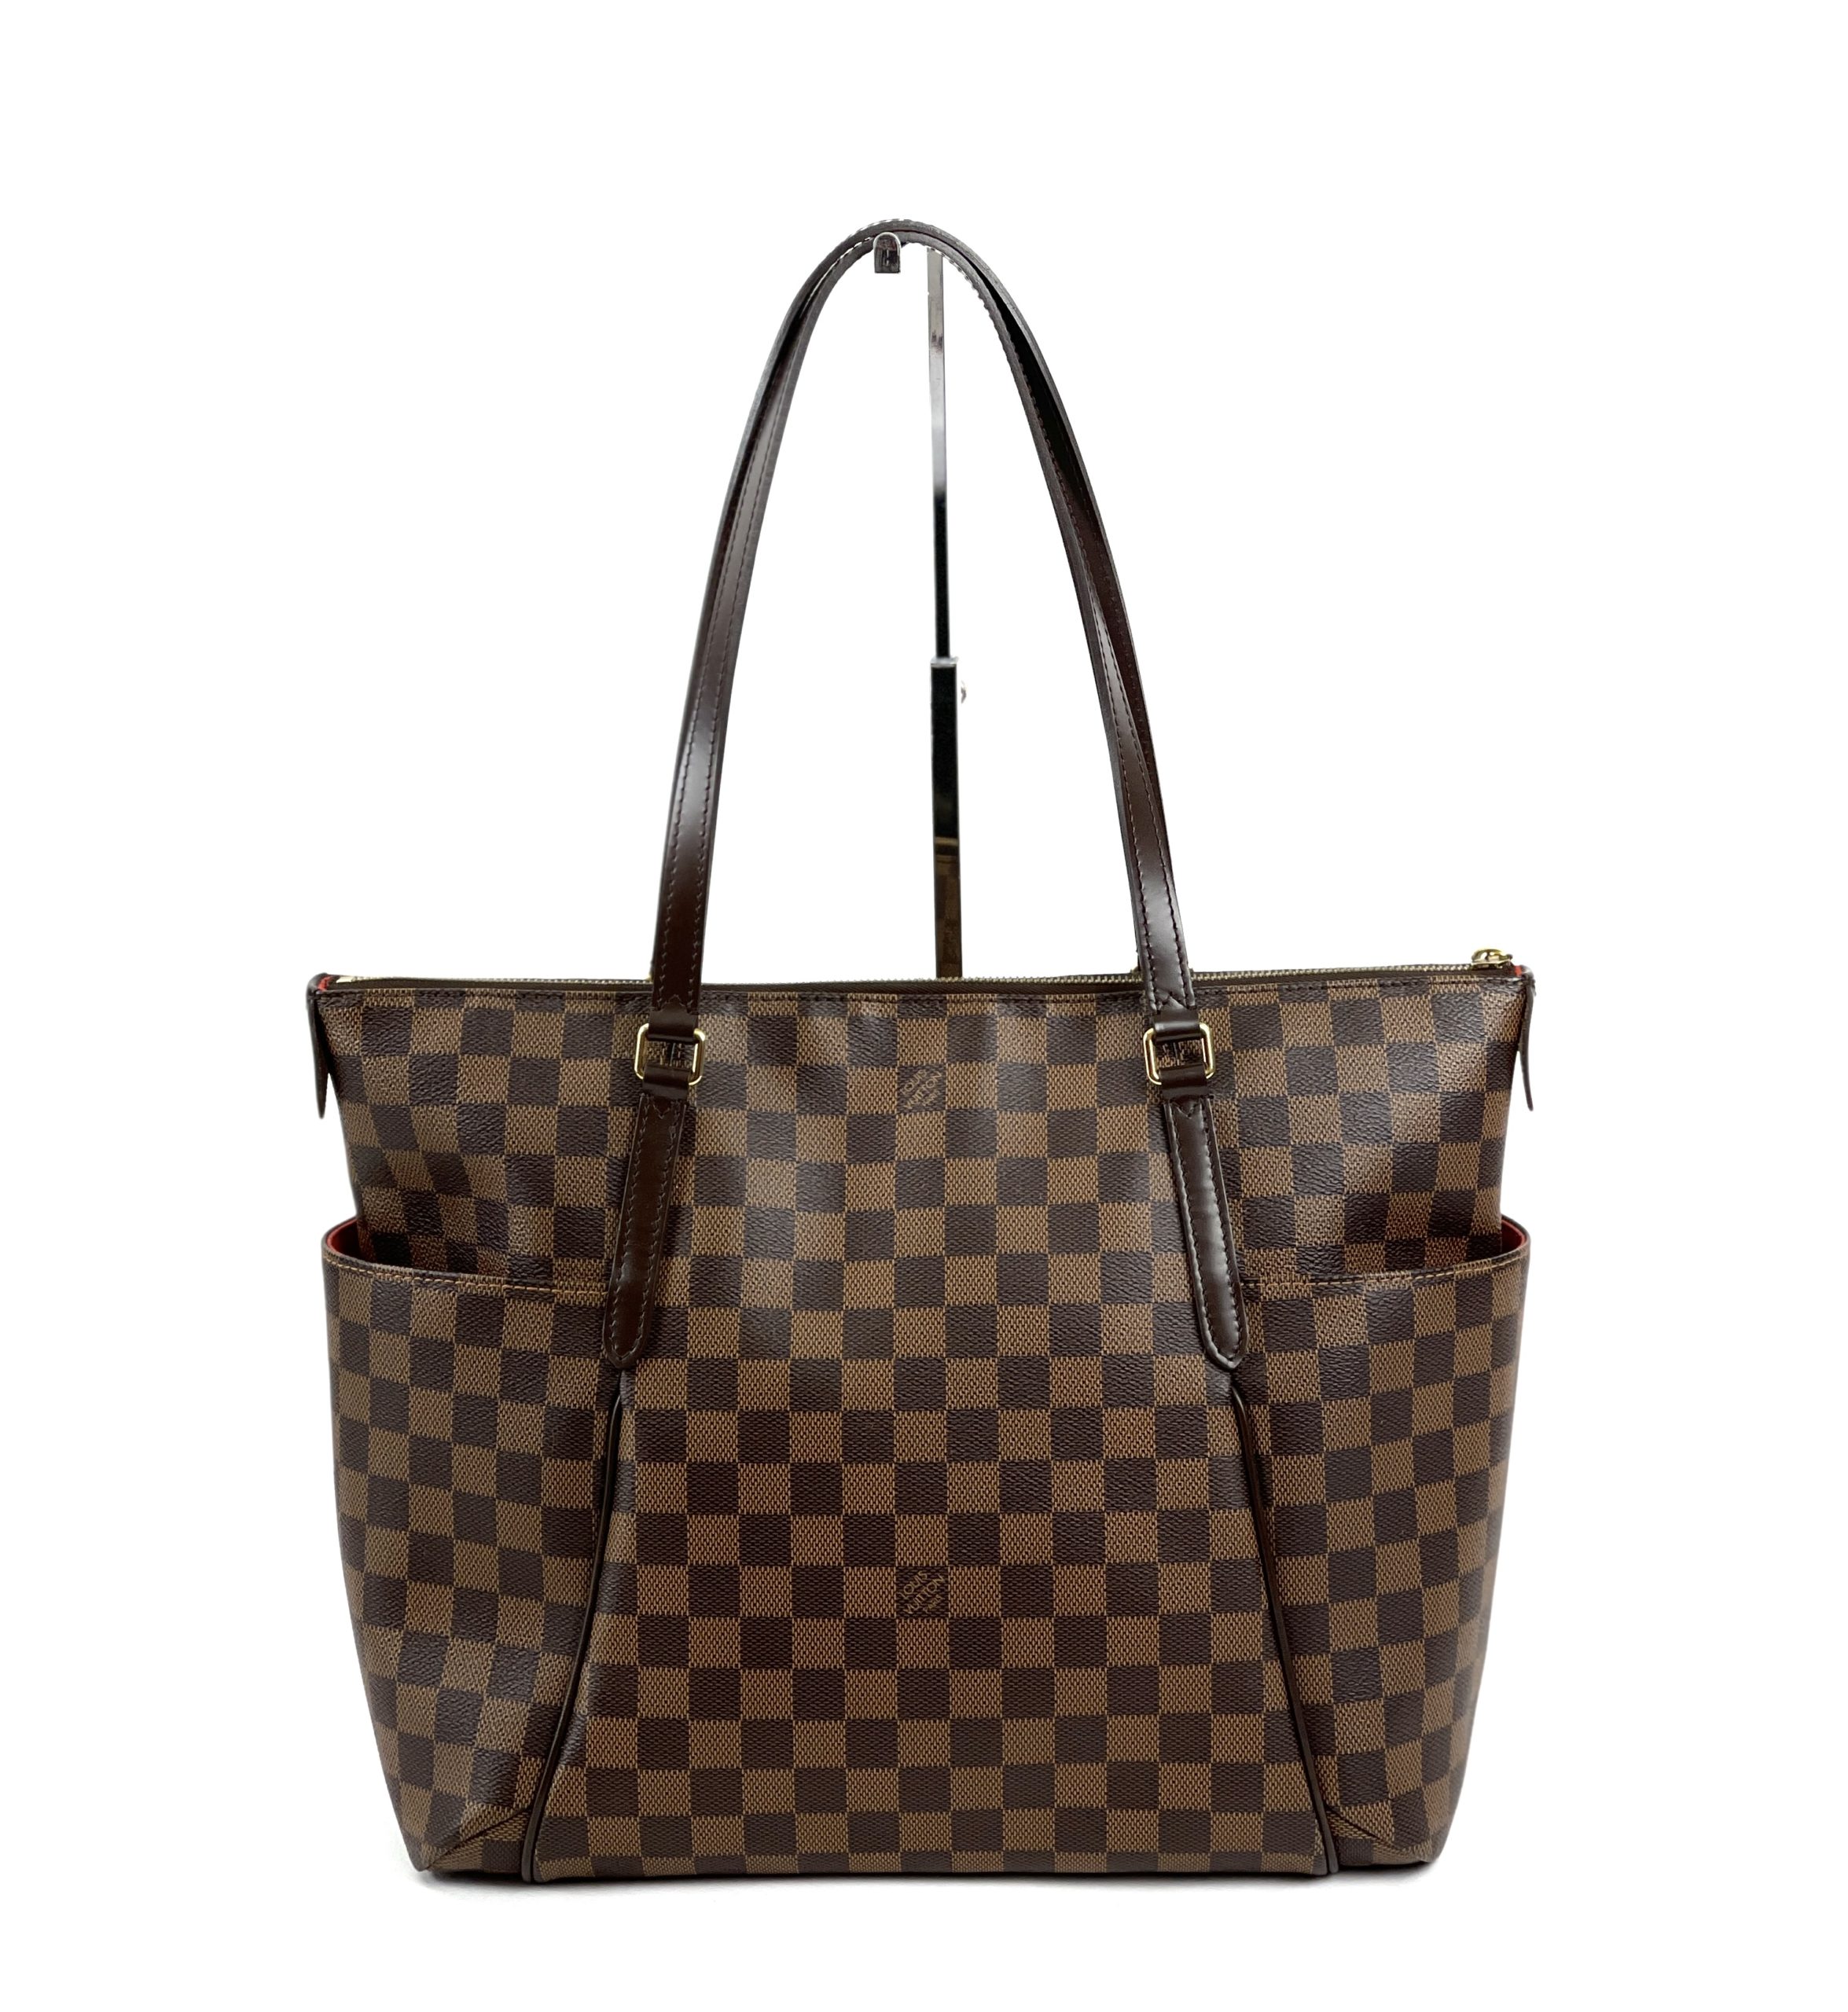 Brown Louis Vuitton Damier Ebene Canvas Tote Bag For Sale at